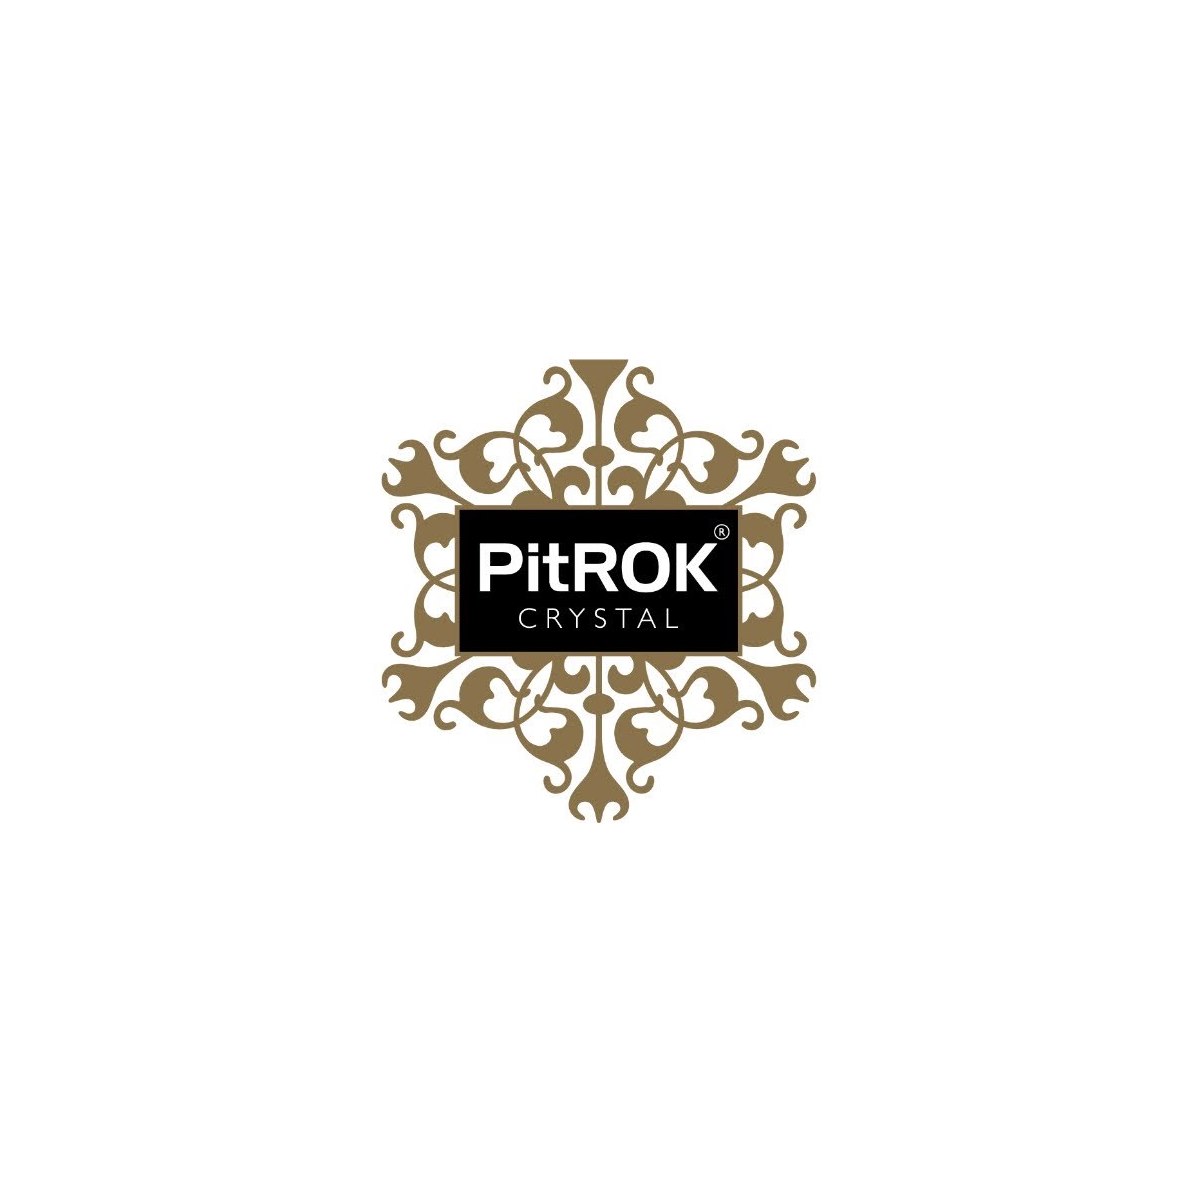 Where to buy Pitrok products